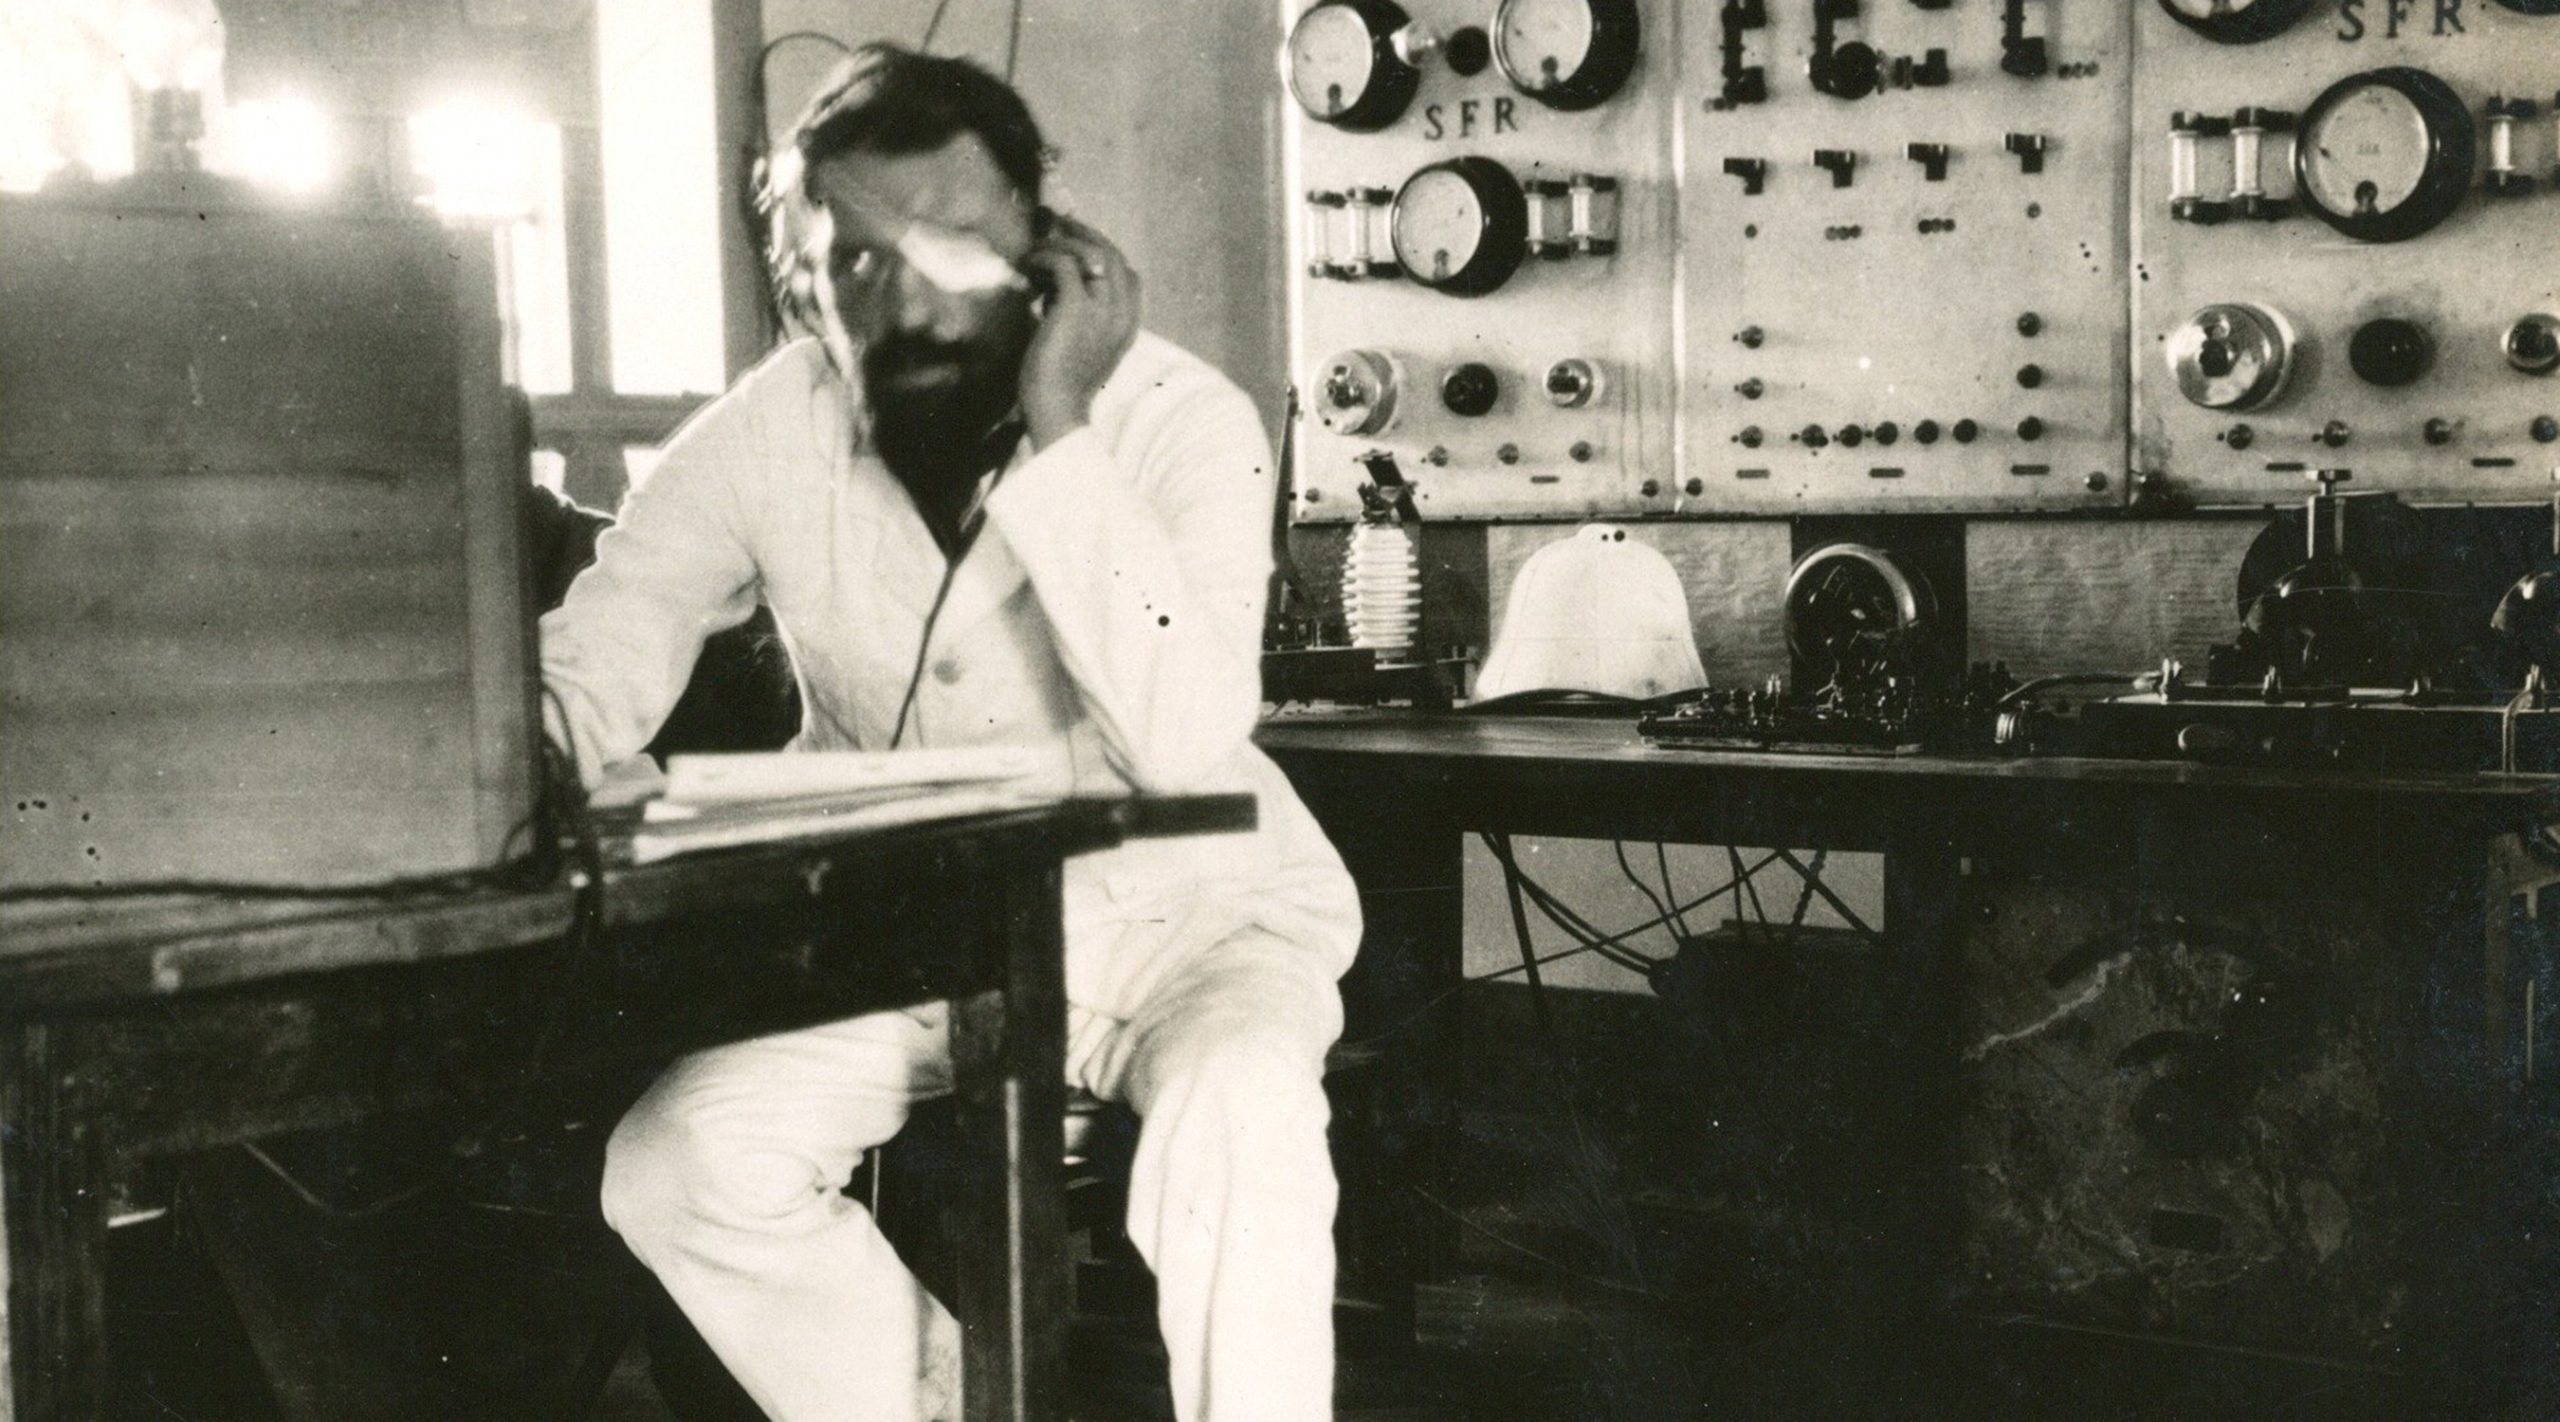 Floyd Gibbons listening at a radio terminal in Mali in 1923.